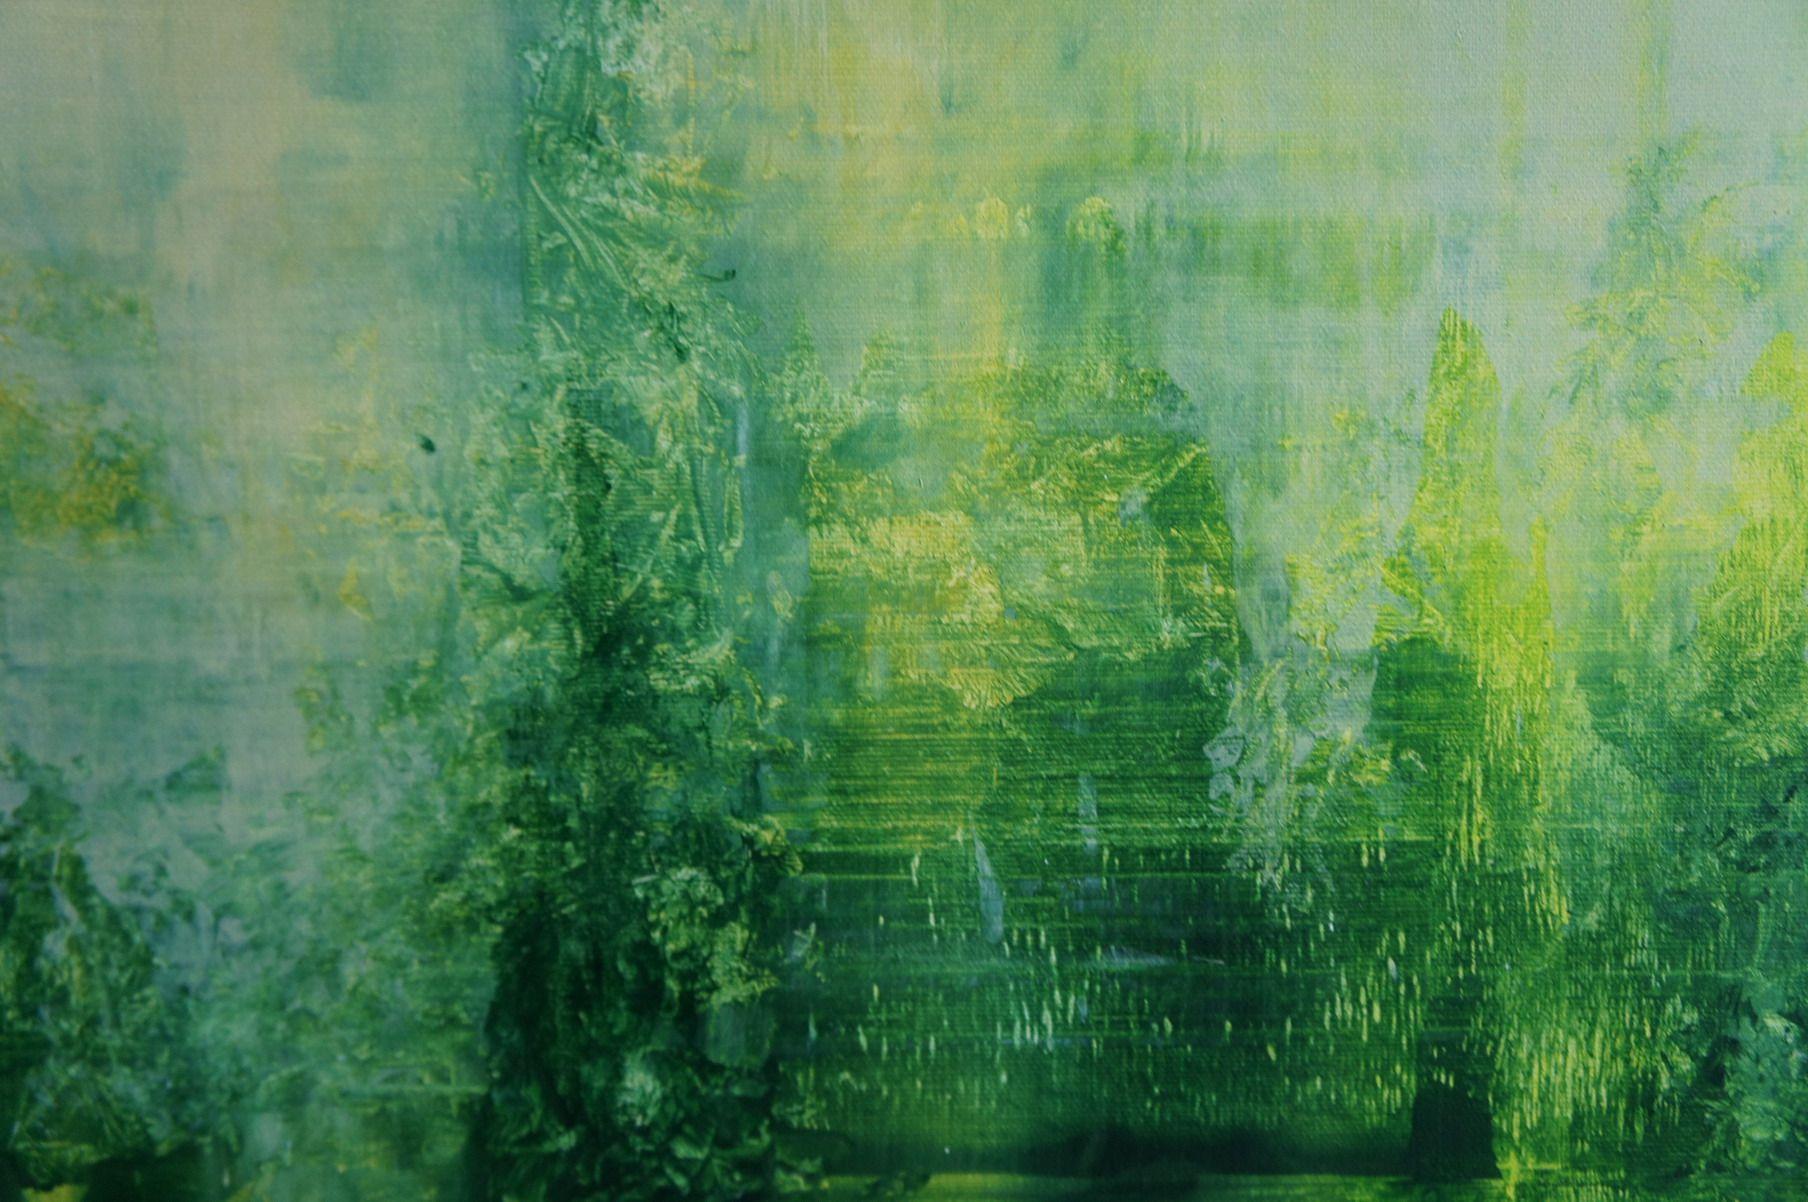 There is something royal majestic but also mysterious and intriguing about this painting that comes in tones between green and white. Welcome to Kingâ€™s Garden. Enjoy!    Unique painting using high-quality acrylic colors on gesso-primed